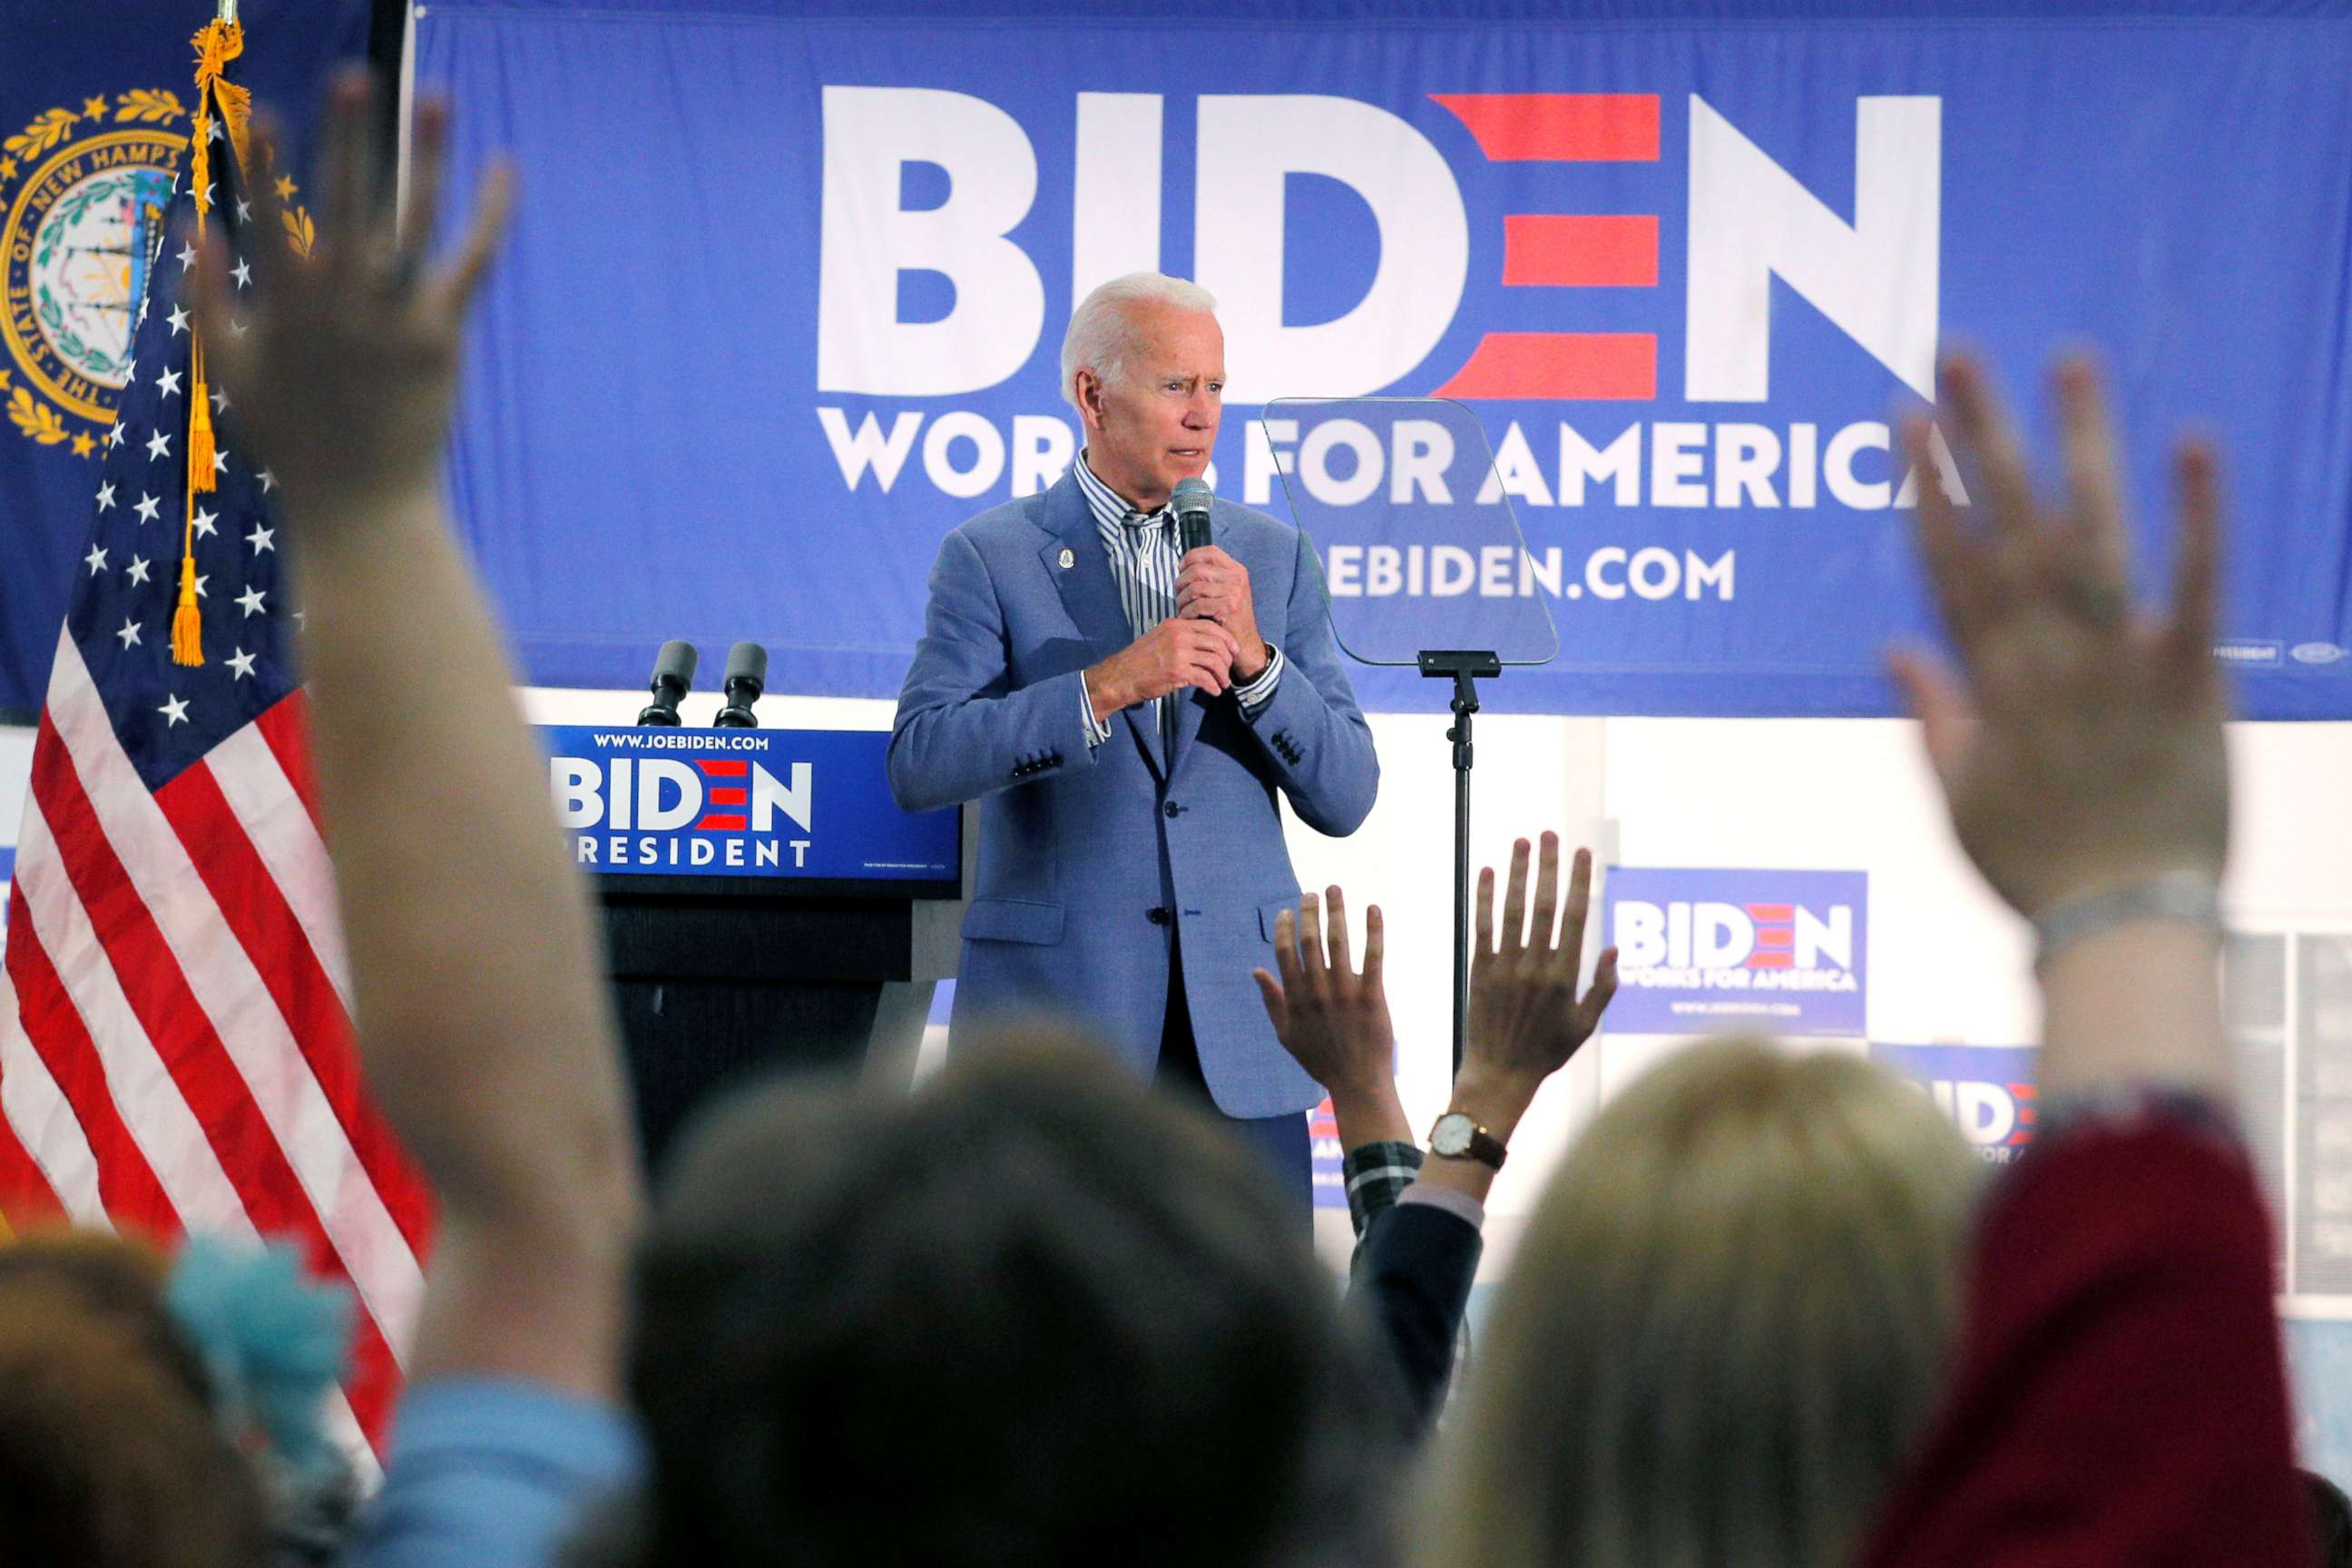 PHOTO: Democratic presidential candidate and former Vice President Joe Biden takes questions from the audience at a campaign stop at the IBEW Local 490 in Concord, N.H., June 4, 2019.  